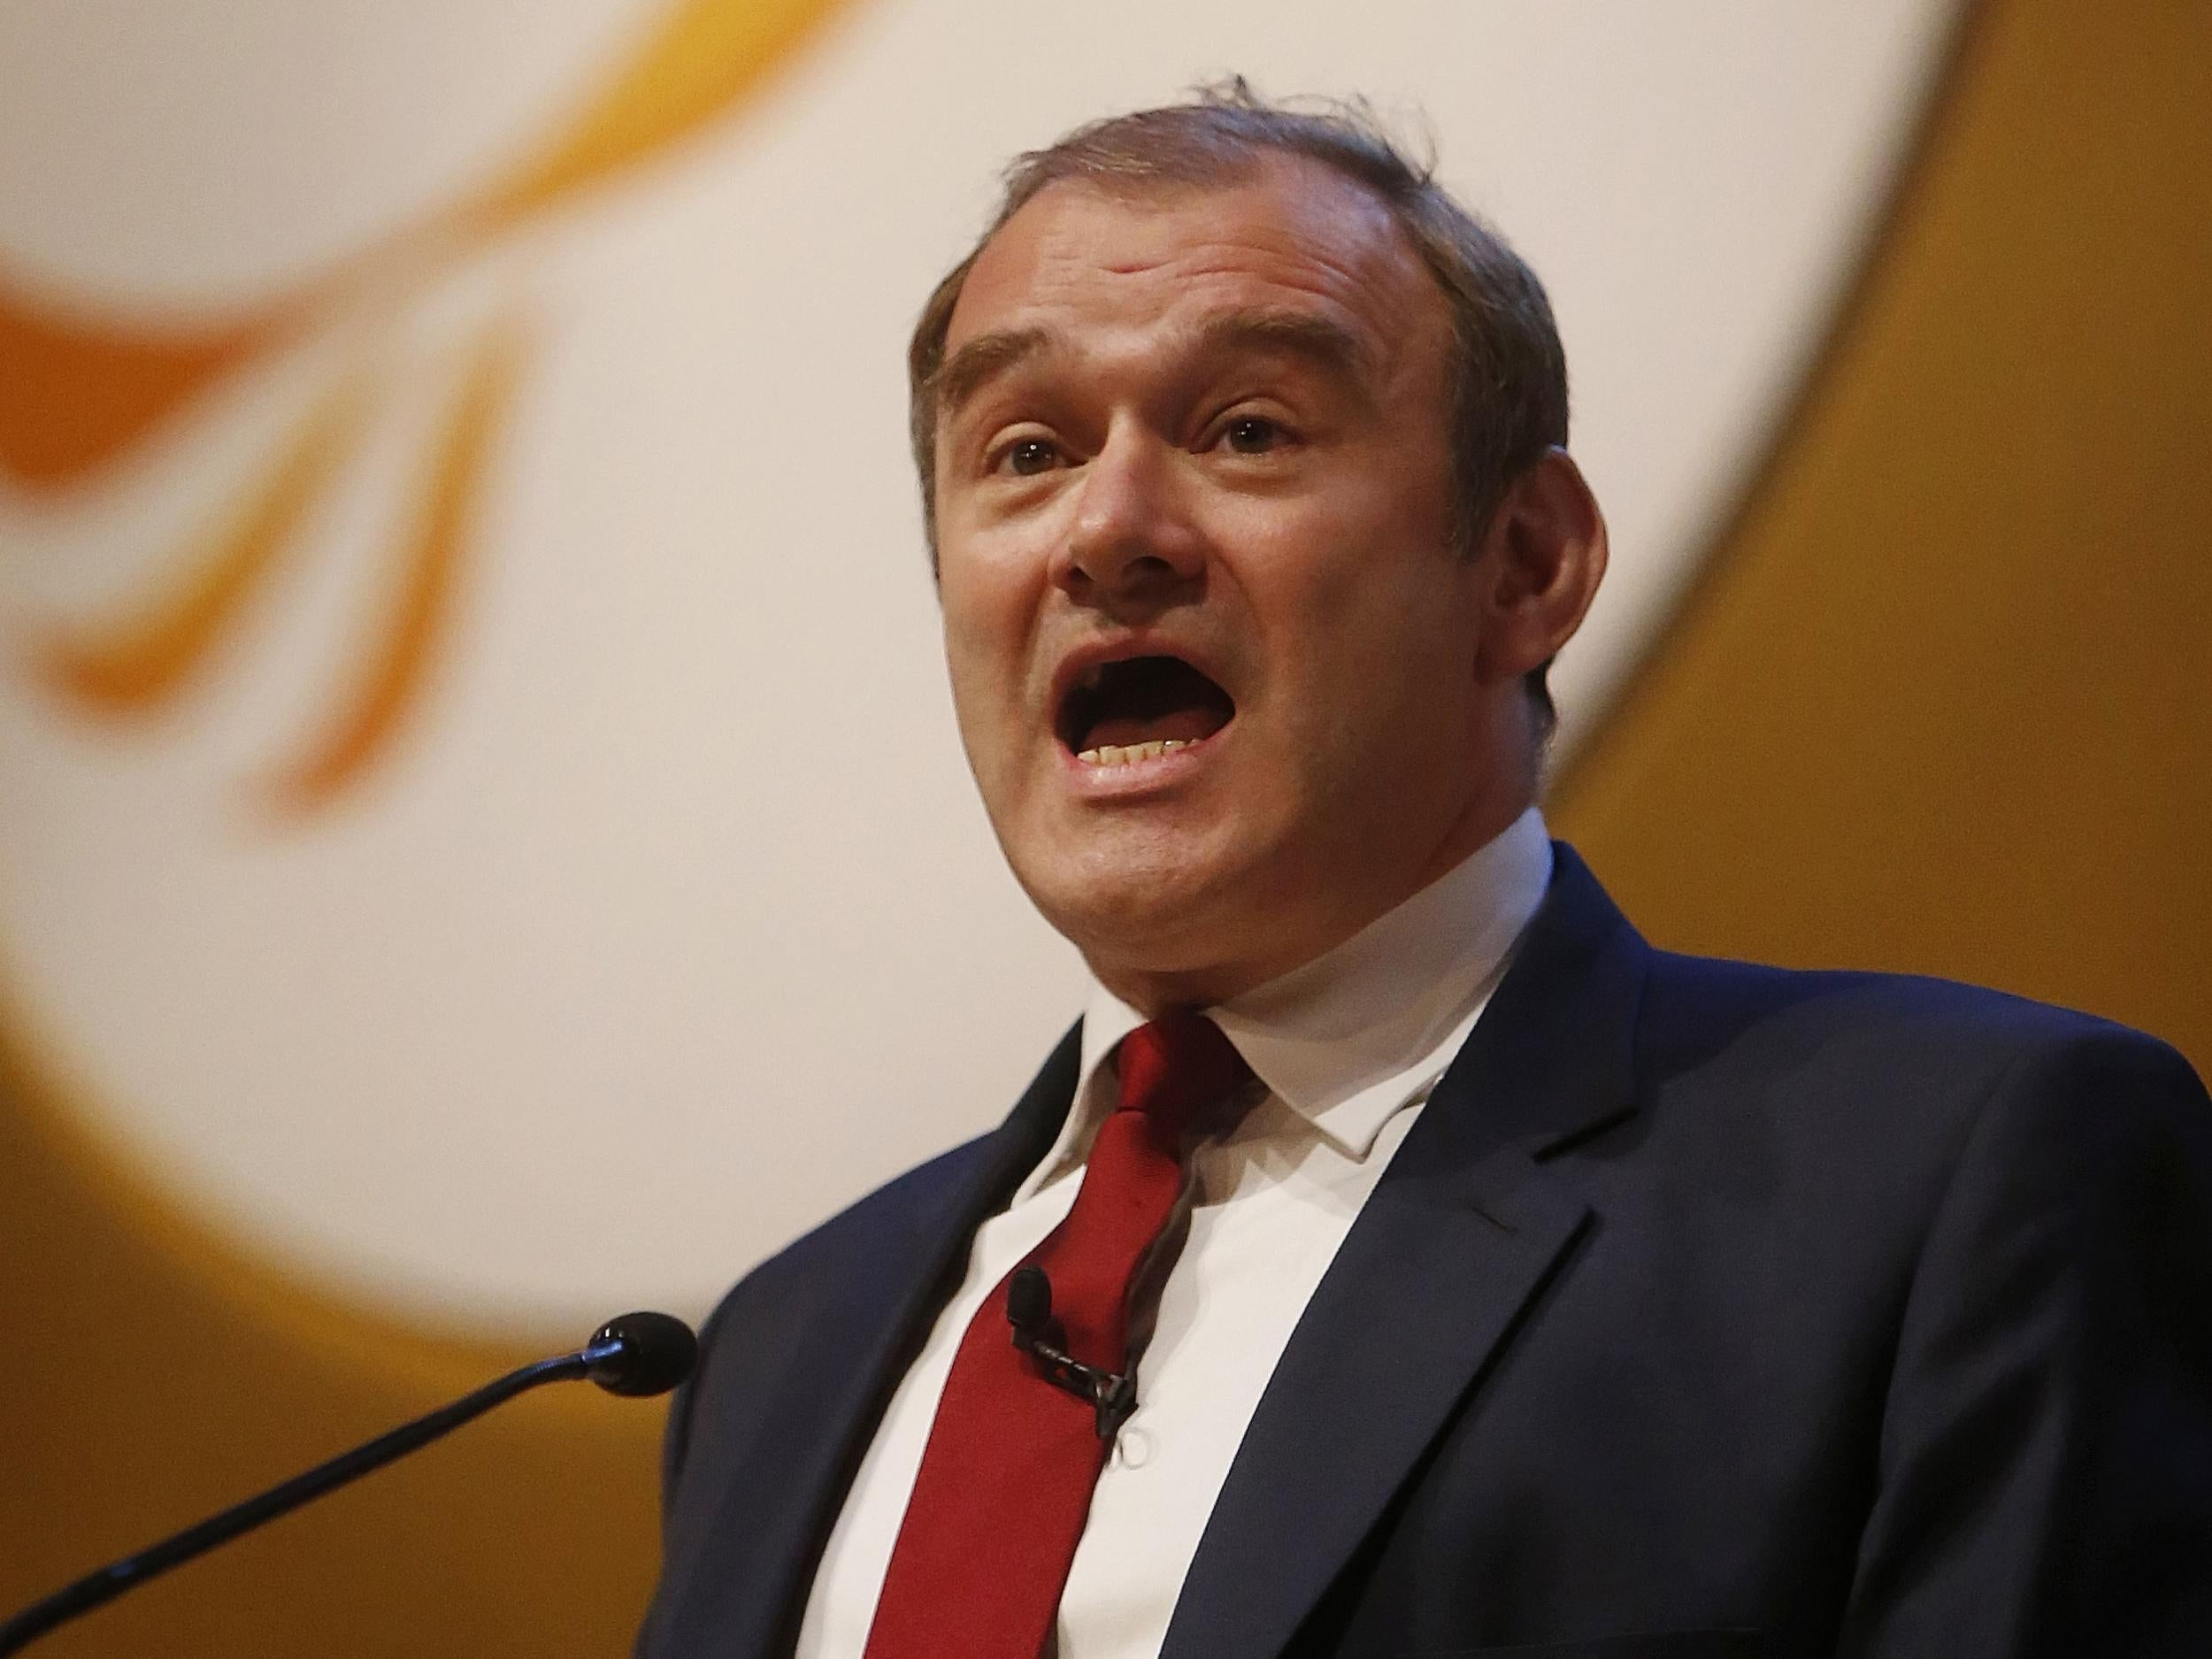 Ed Davey has made it clear he would position the party to the left of centre